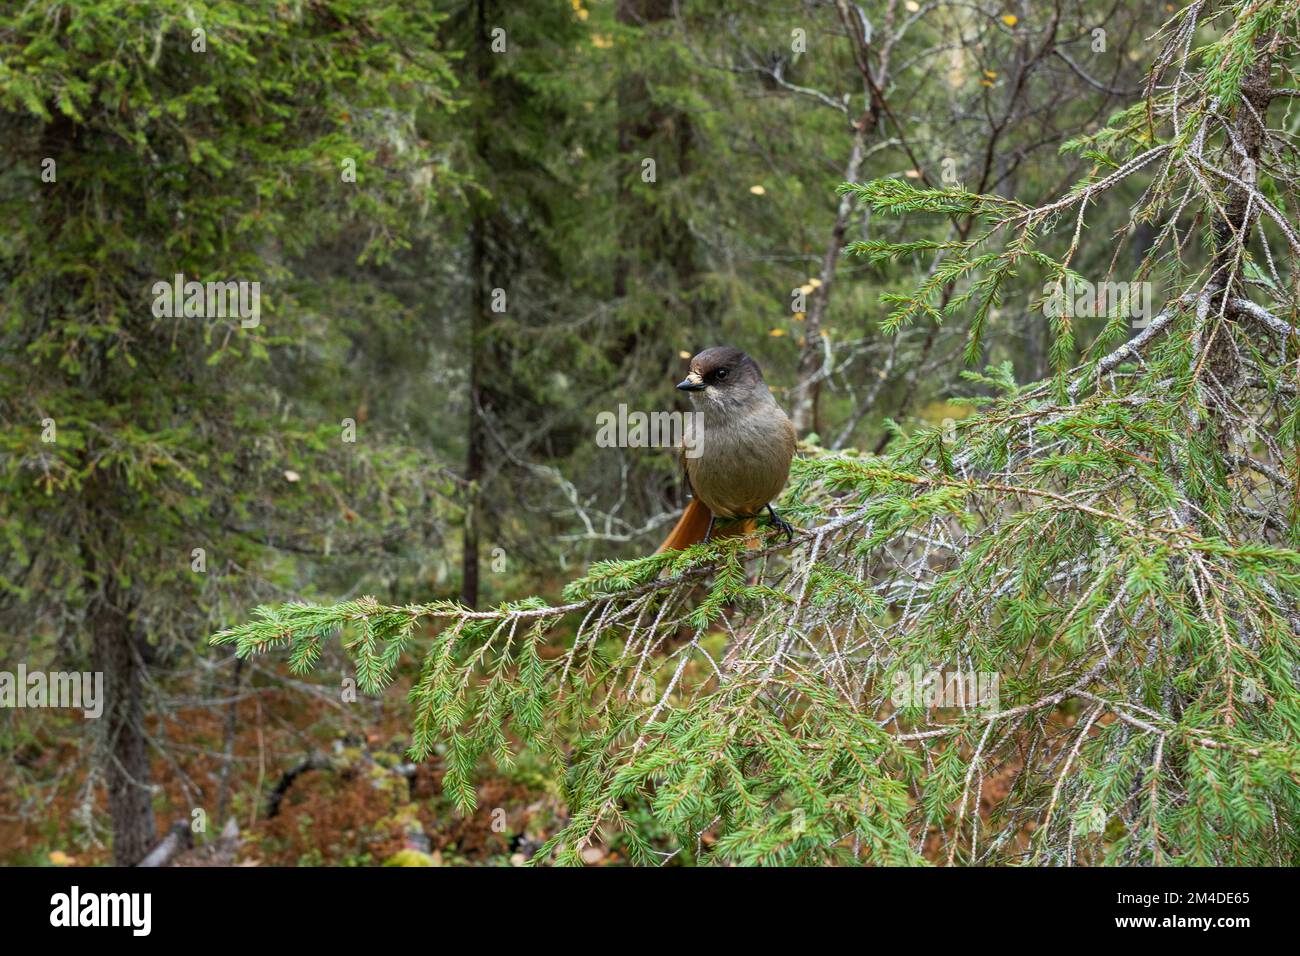 A curious Siberian jay perched on a Spruce in an old-growth forest in Valtavaara near Kuusamo, Northern Finland Stock Photo